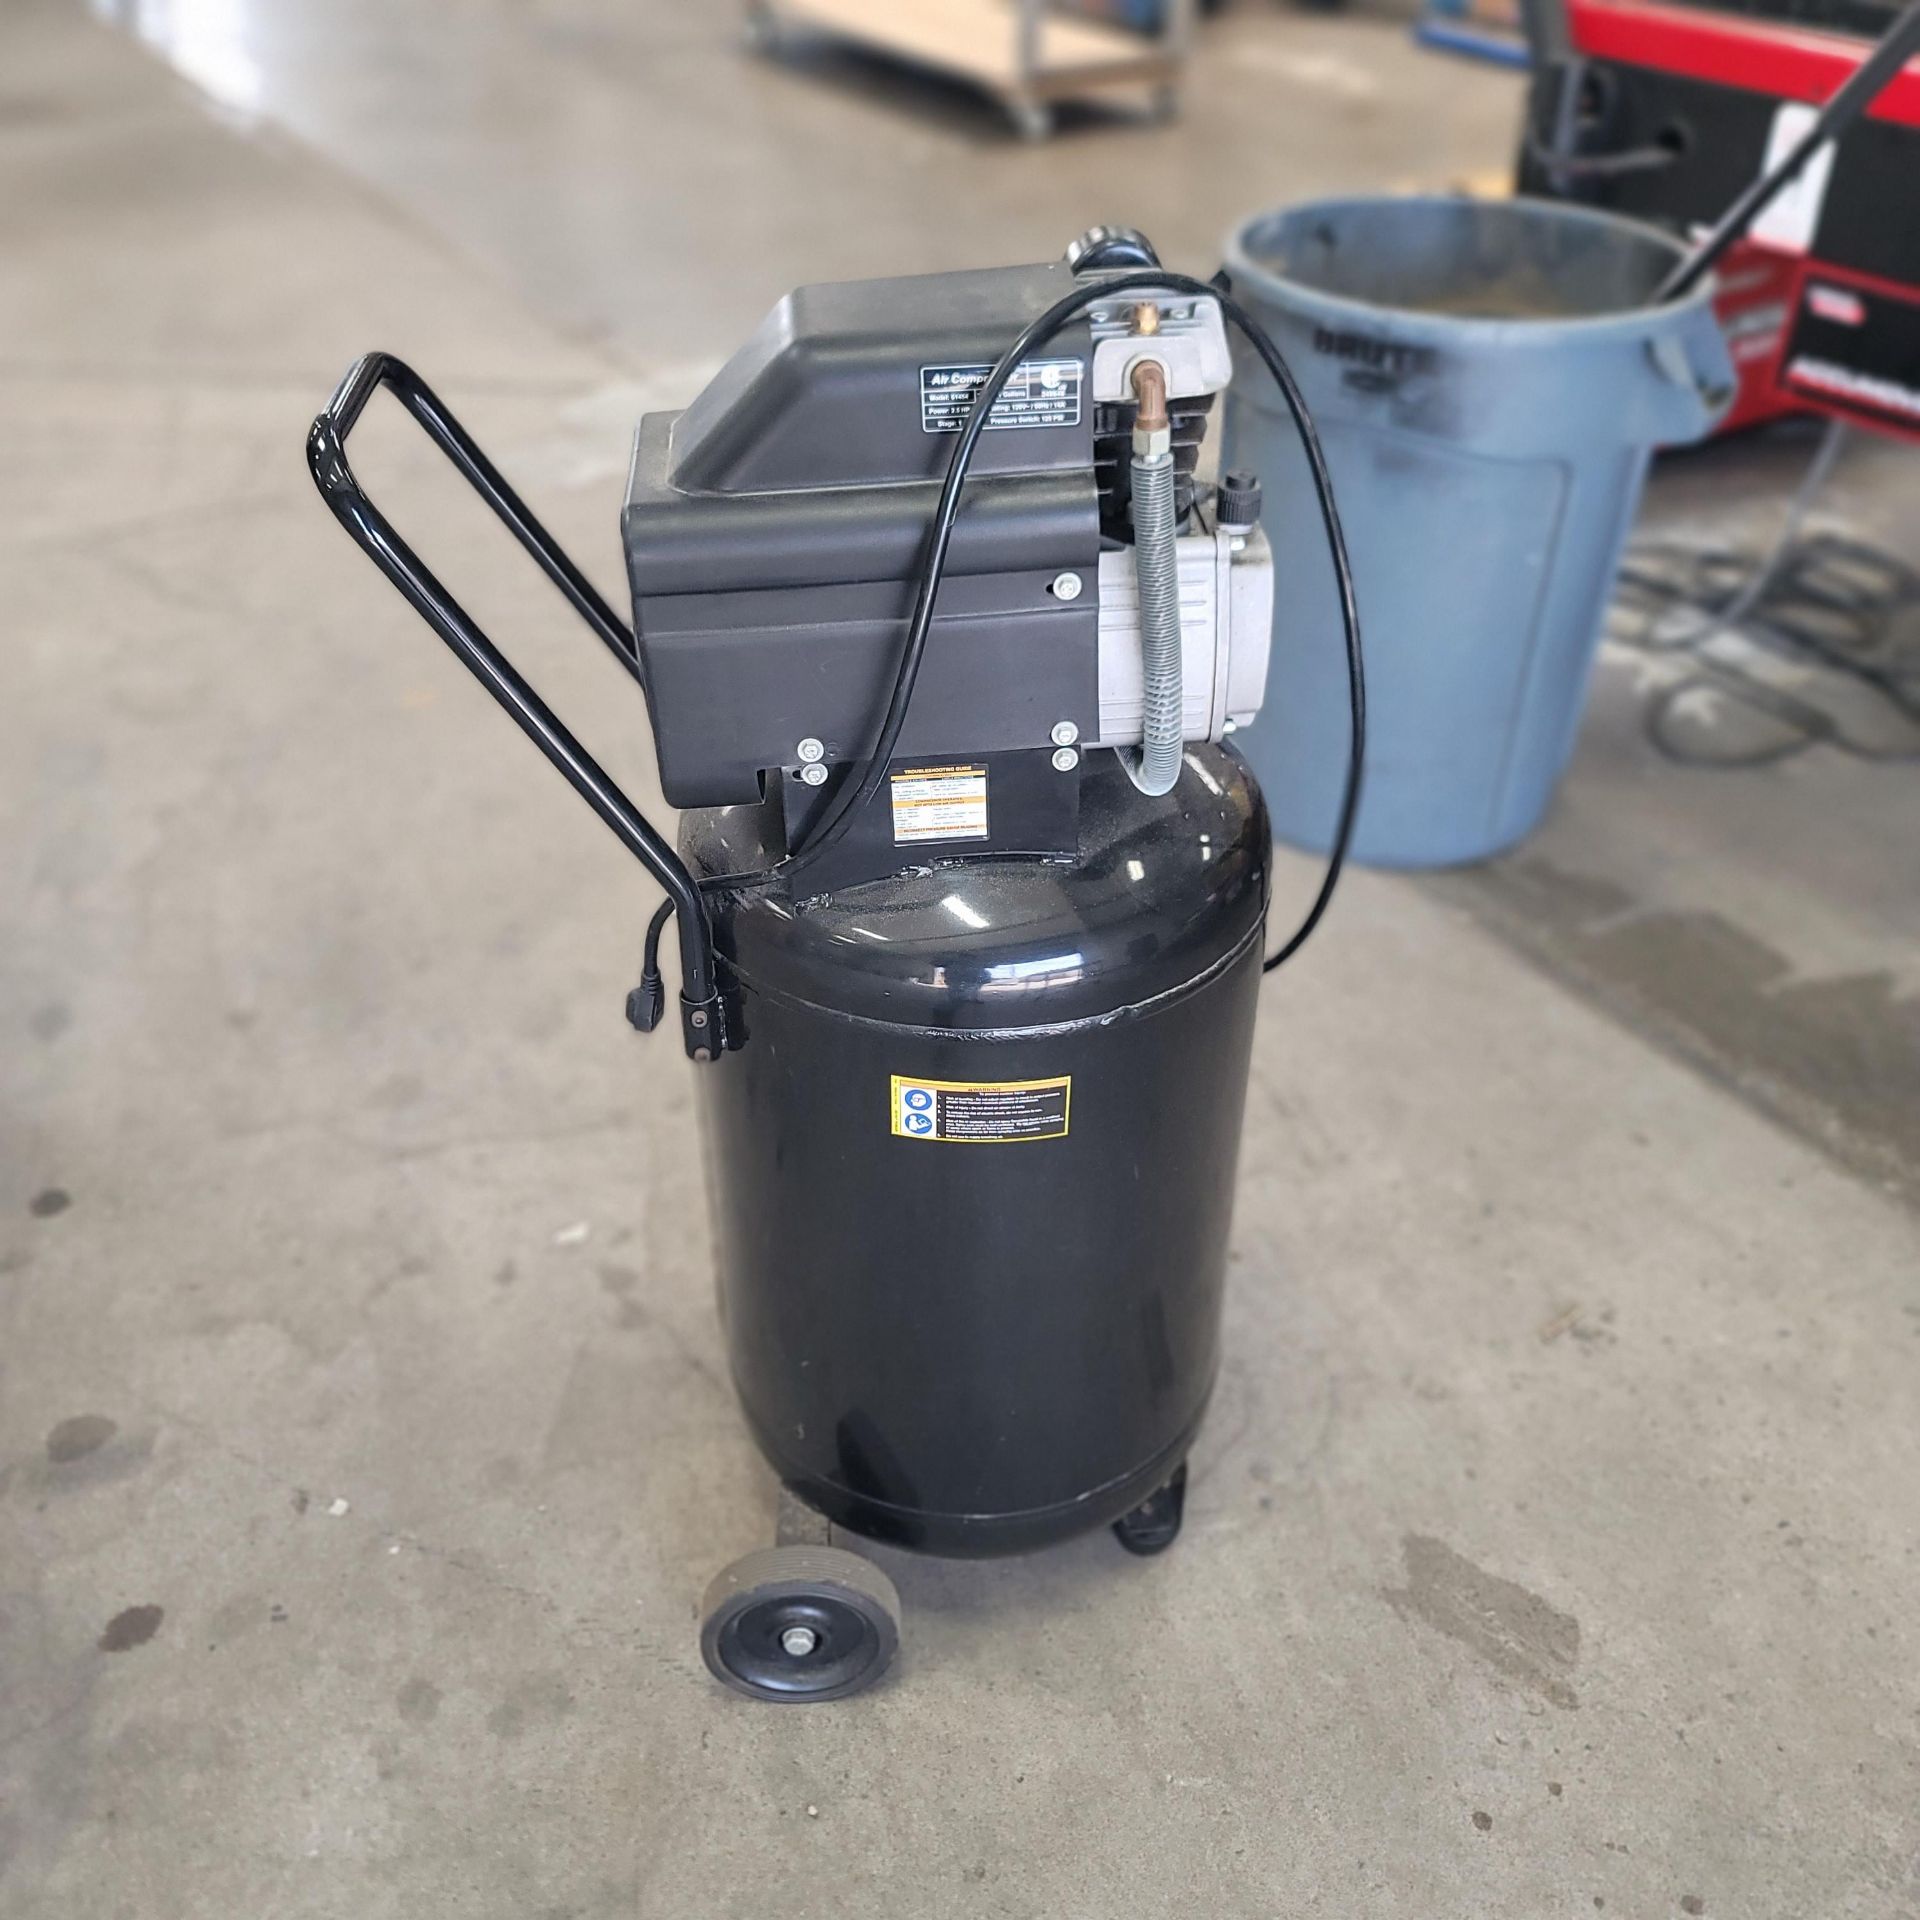 CENTRAL PNEUMATIC PORTABLE AIR COMPRESSOR, MODEL 61454, 2.5 HP, 21-GAL TANK, 125 MAX PSI - Image 2 of 3